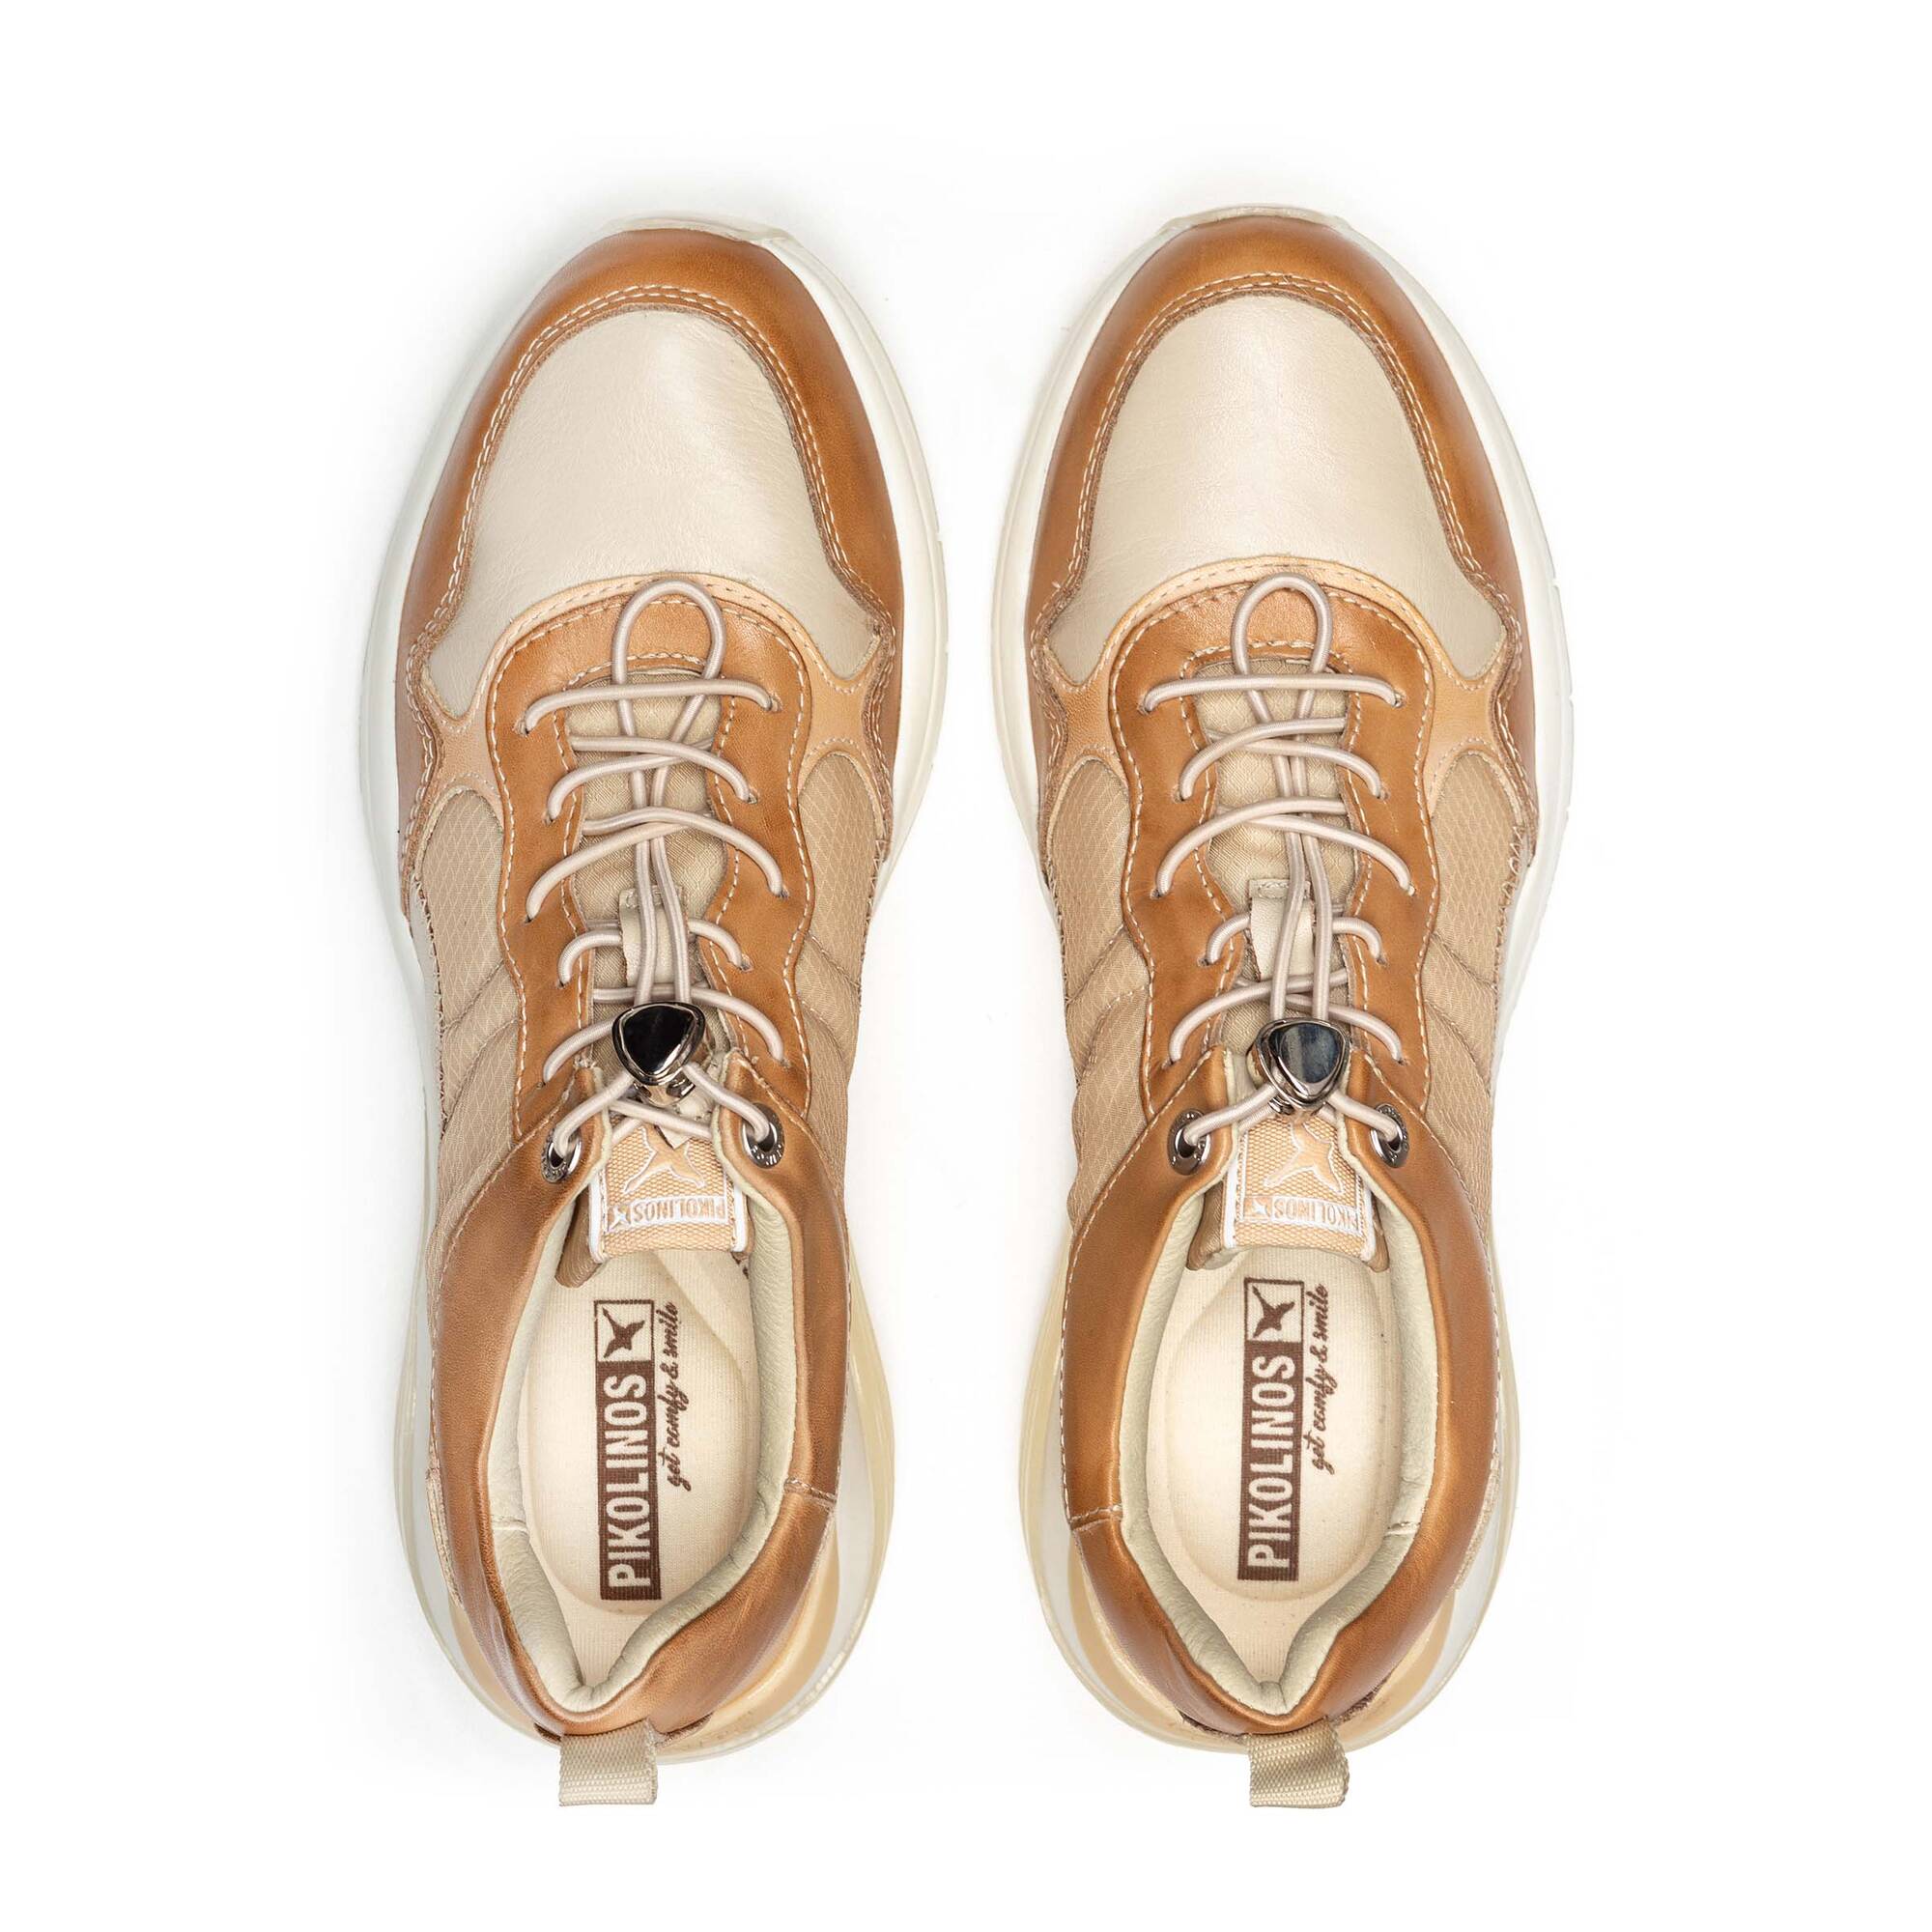 Sneakers | NERJA W9Q-6520C1, ALMOND, large image number 100 | null